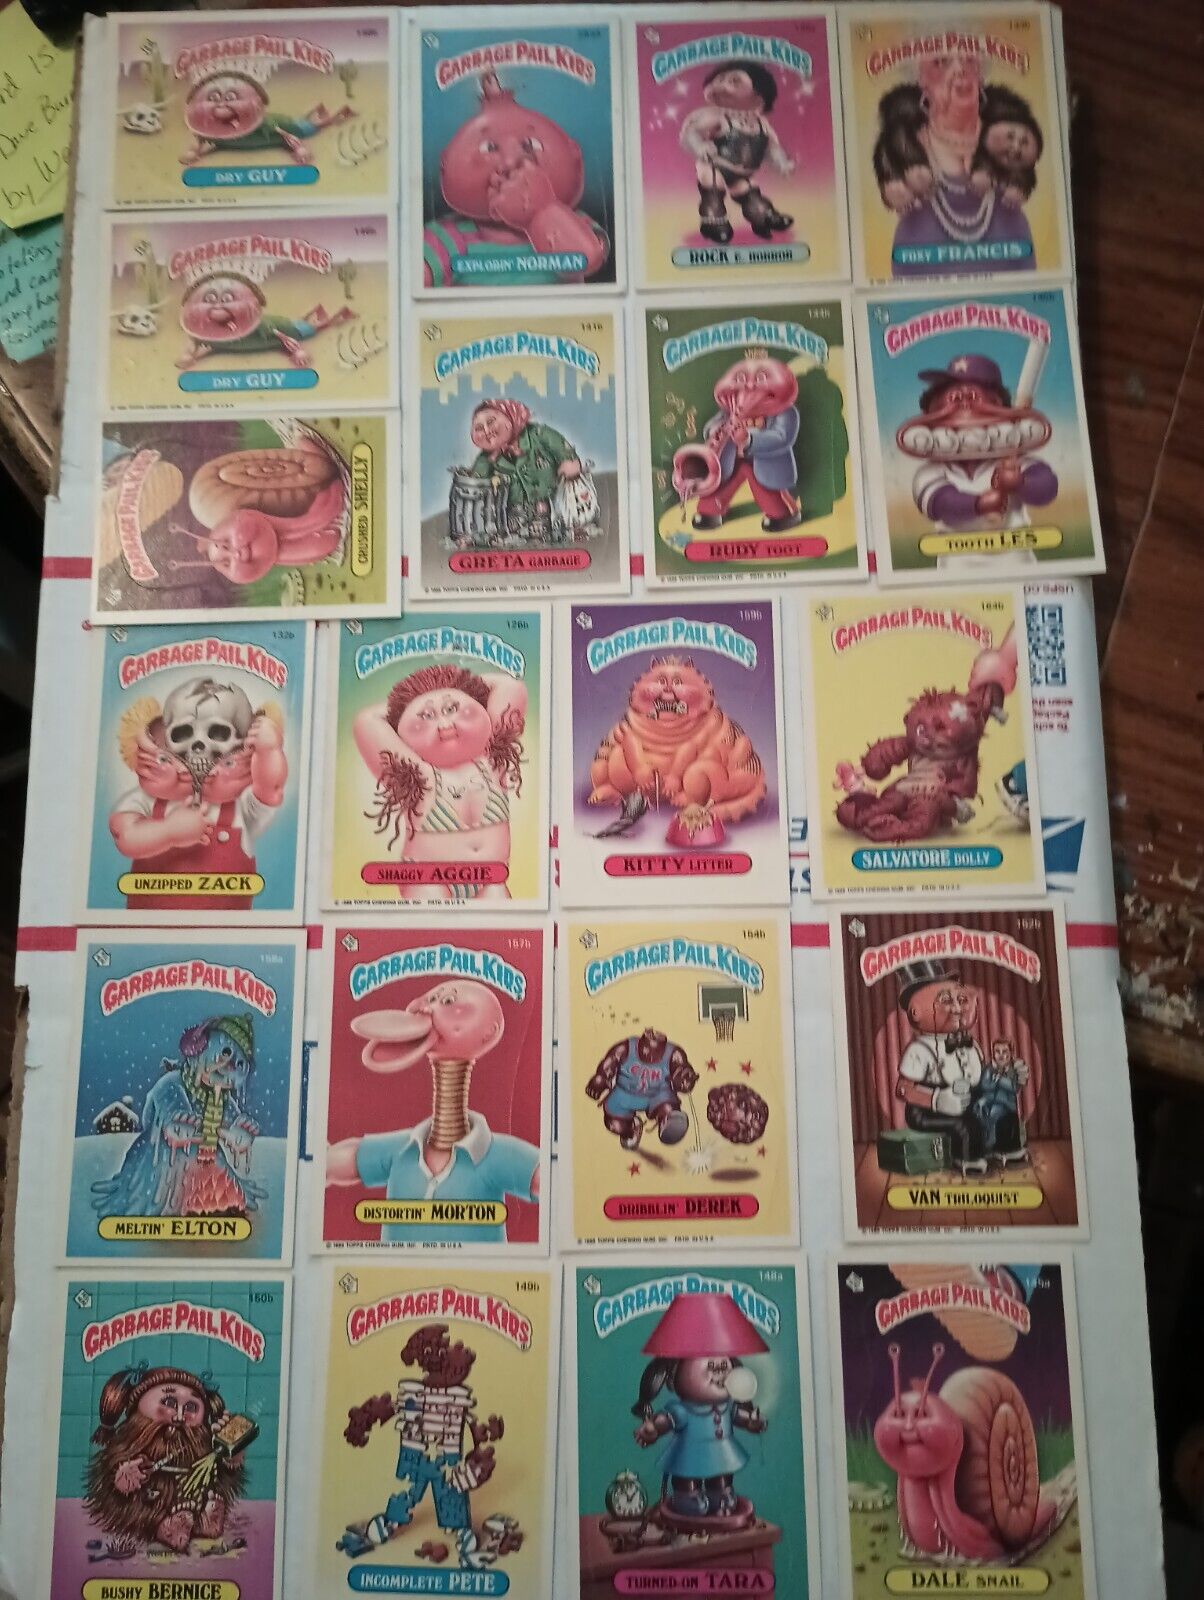 21 Early Garbage Pail Kids in Great Condition